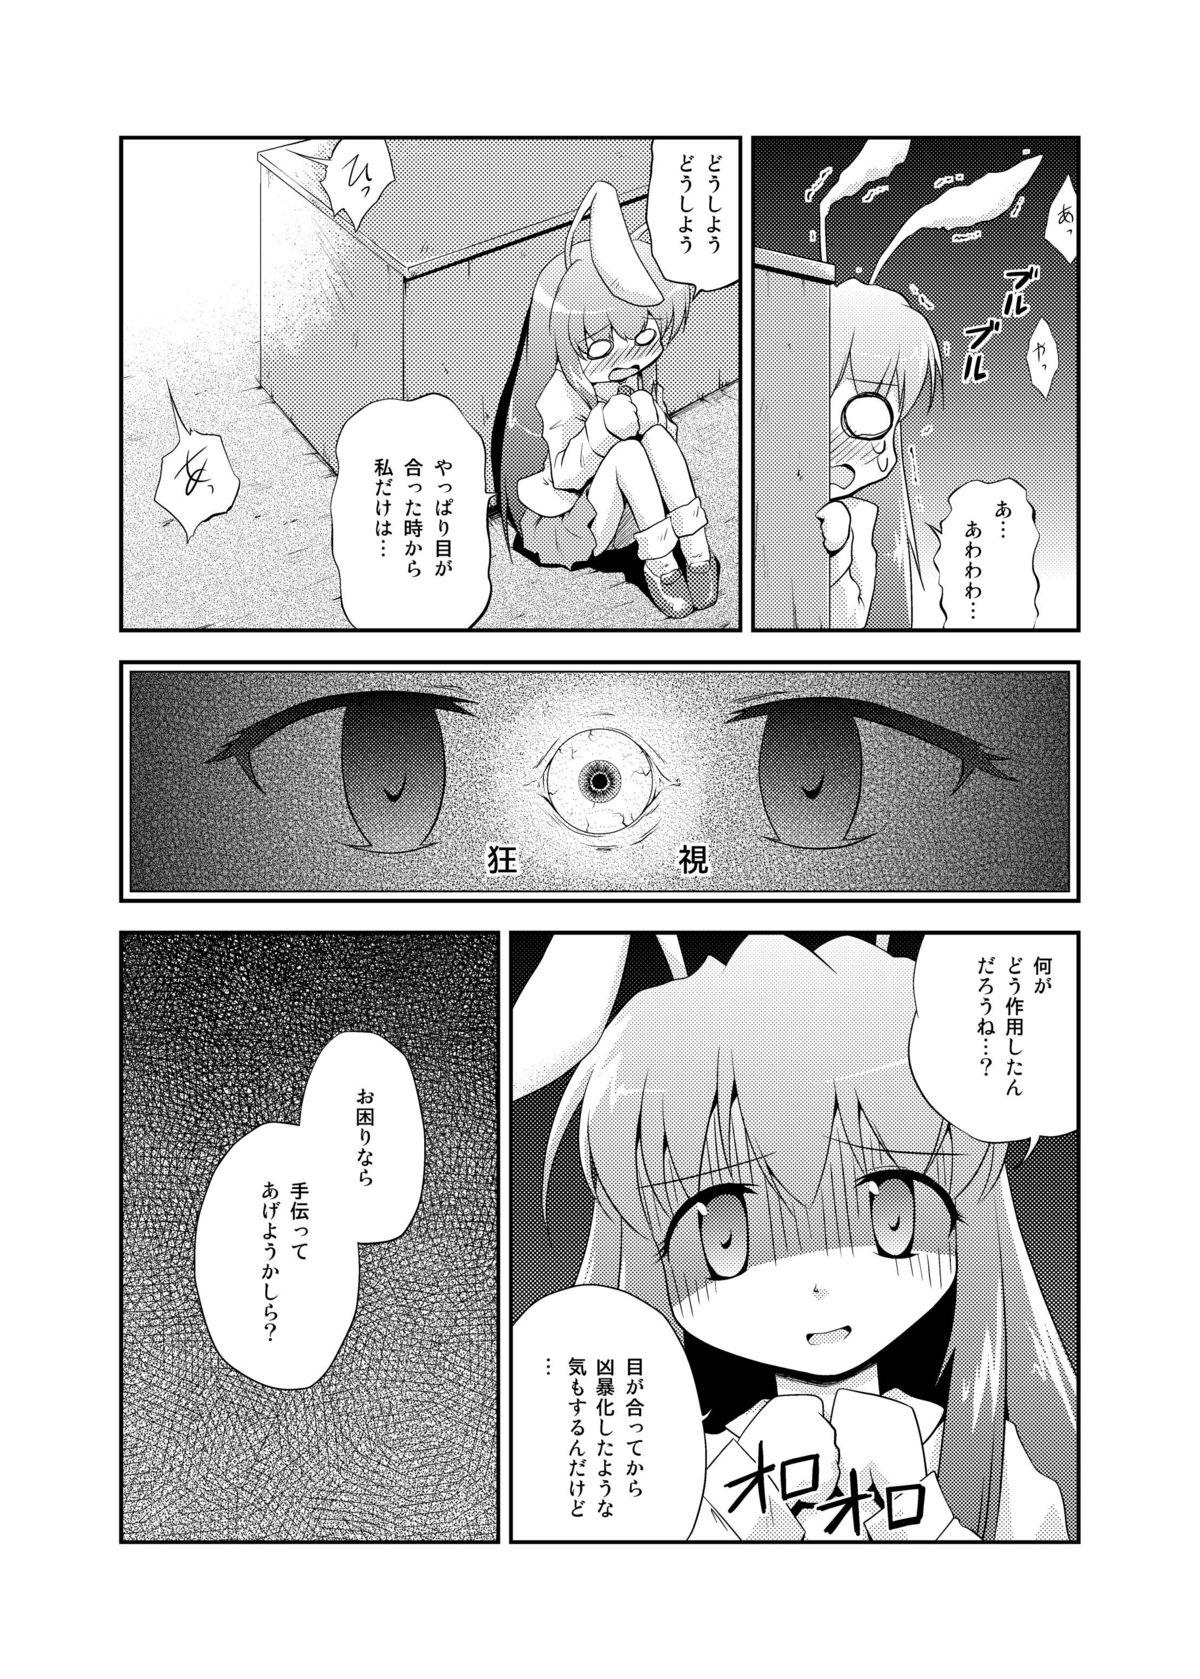 Salope DISARM CLOTHES - Touhou project Home - Page 13